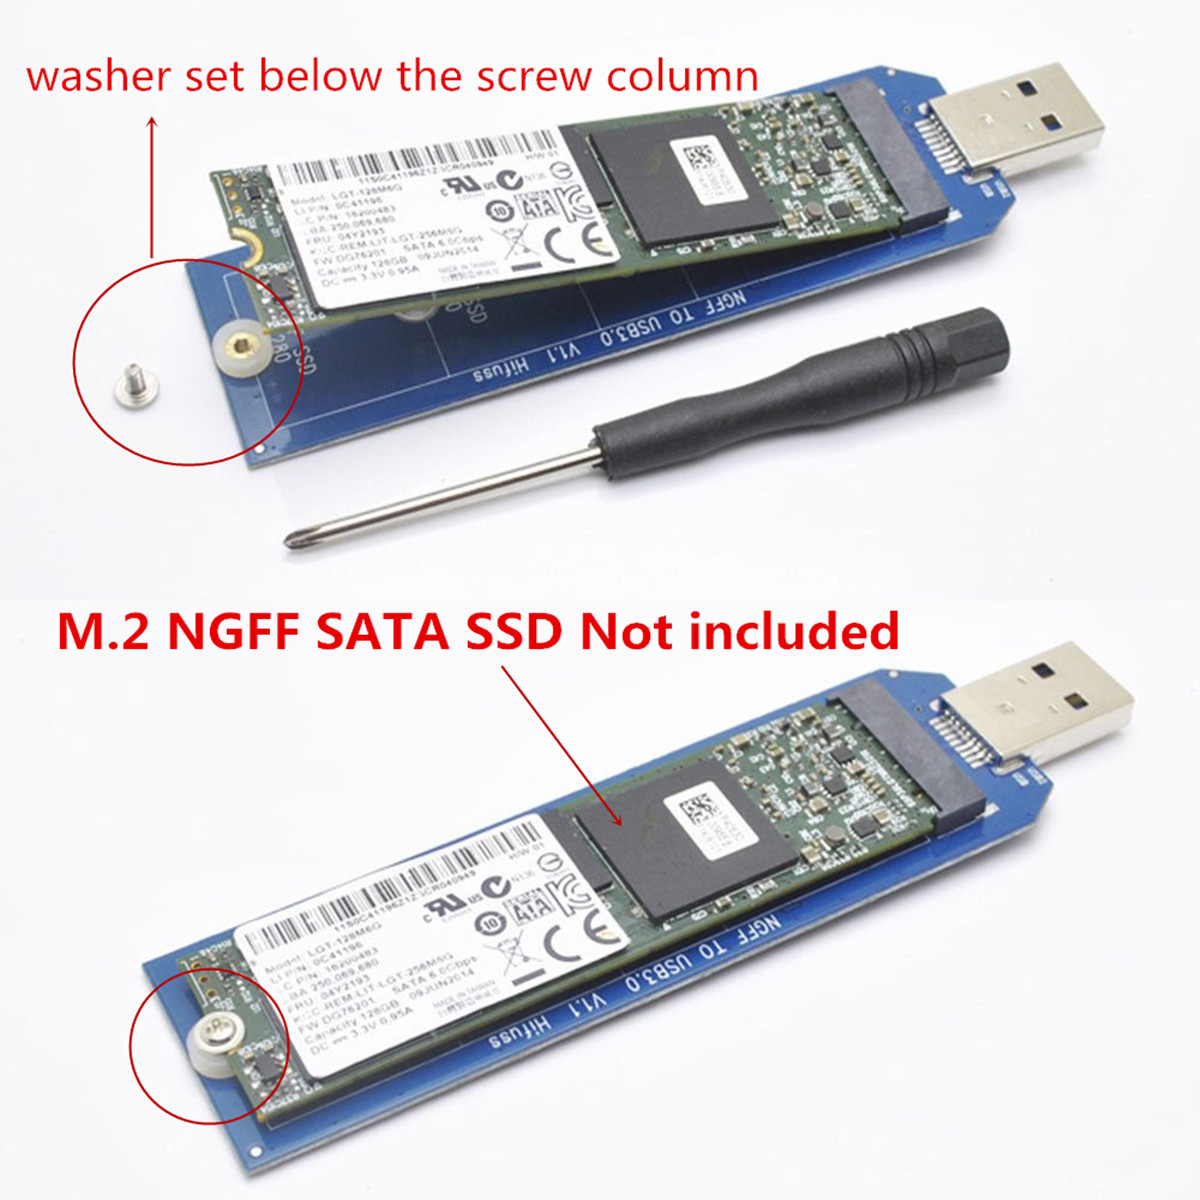 M.2 NGFF SSD SATA to USB 3.0 Converter Adapter External Enclosure Mobile SSD Case 13